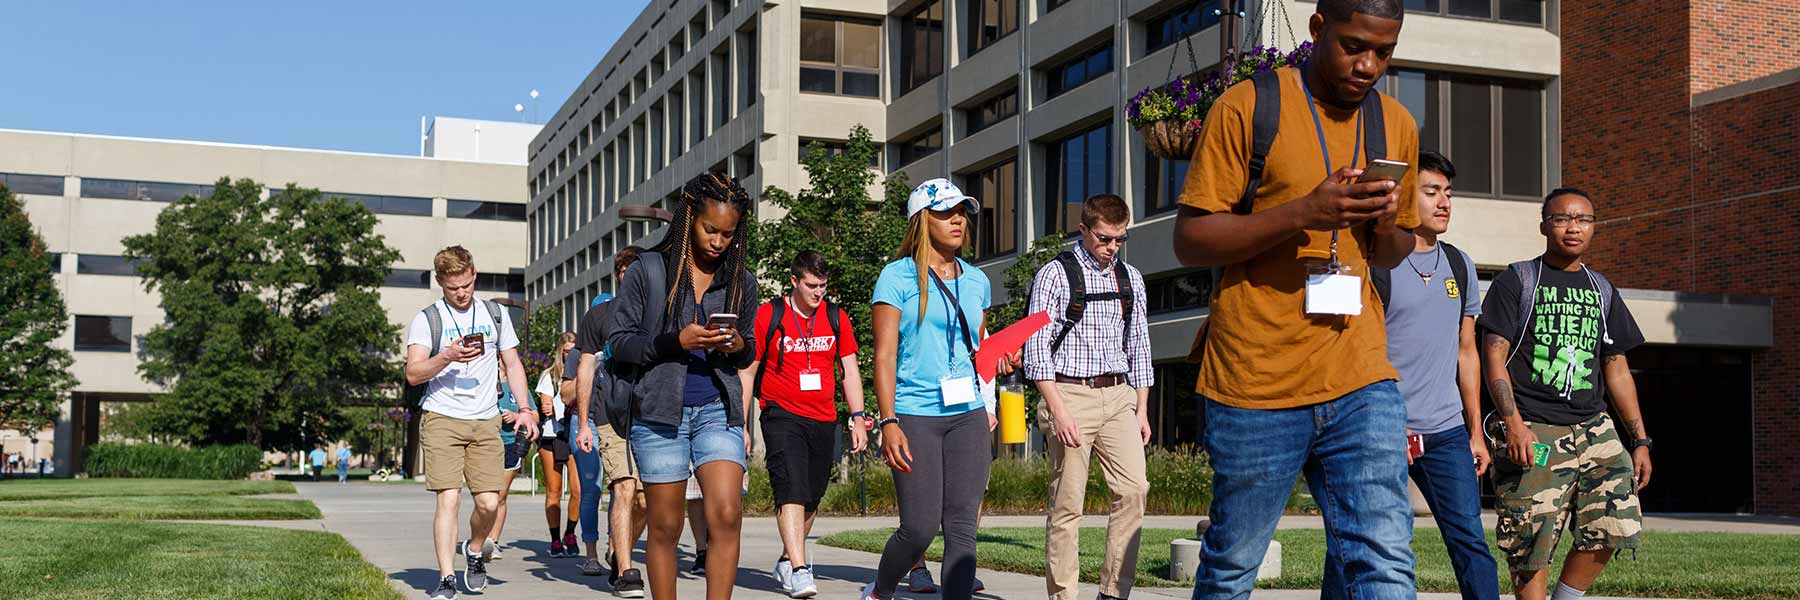 Students check their phones as they walk across campus.